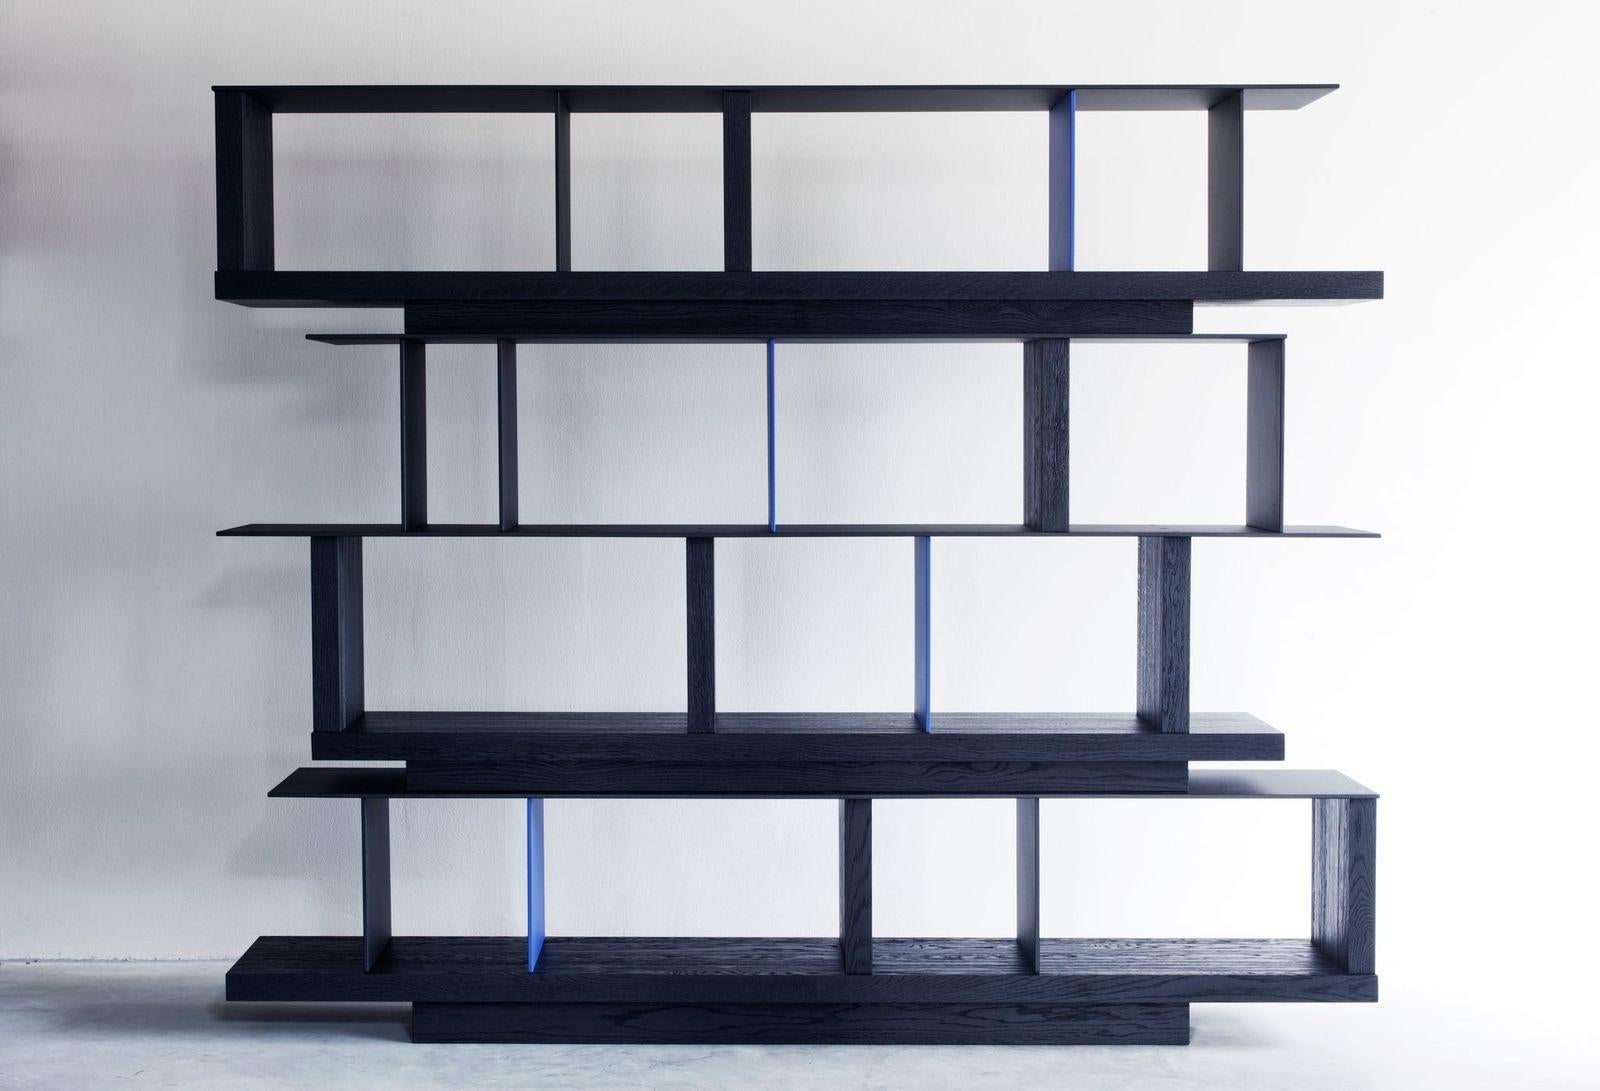 Kitale bookcase by Van Rossum
Dimensions: D250 x W40 x H205 cm
Materials: Oak, steel.

The wood is available in all standard Van Rossum colors, or in a matching finish to customer’s own sample.
The steel bases are available in four colors or in